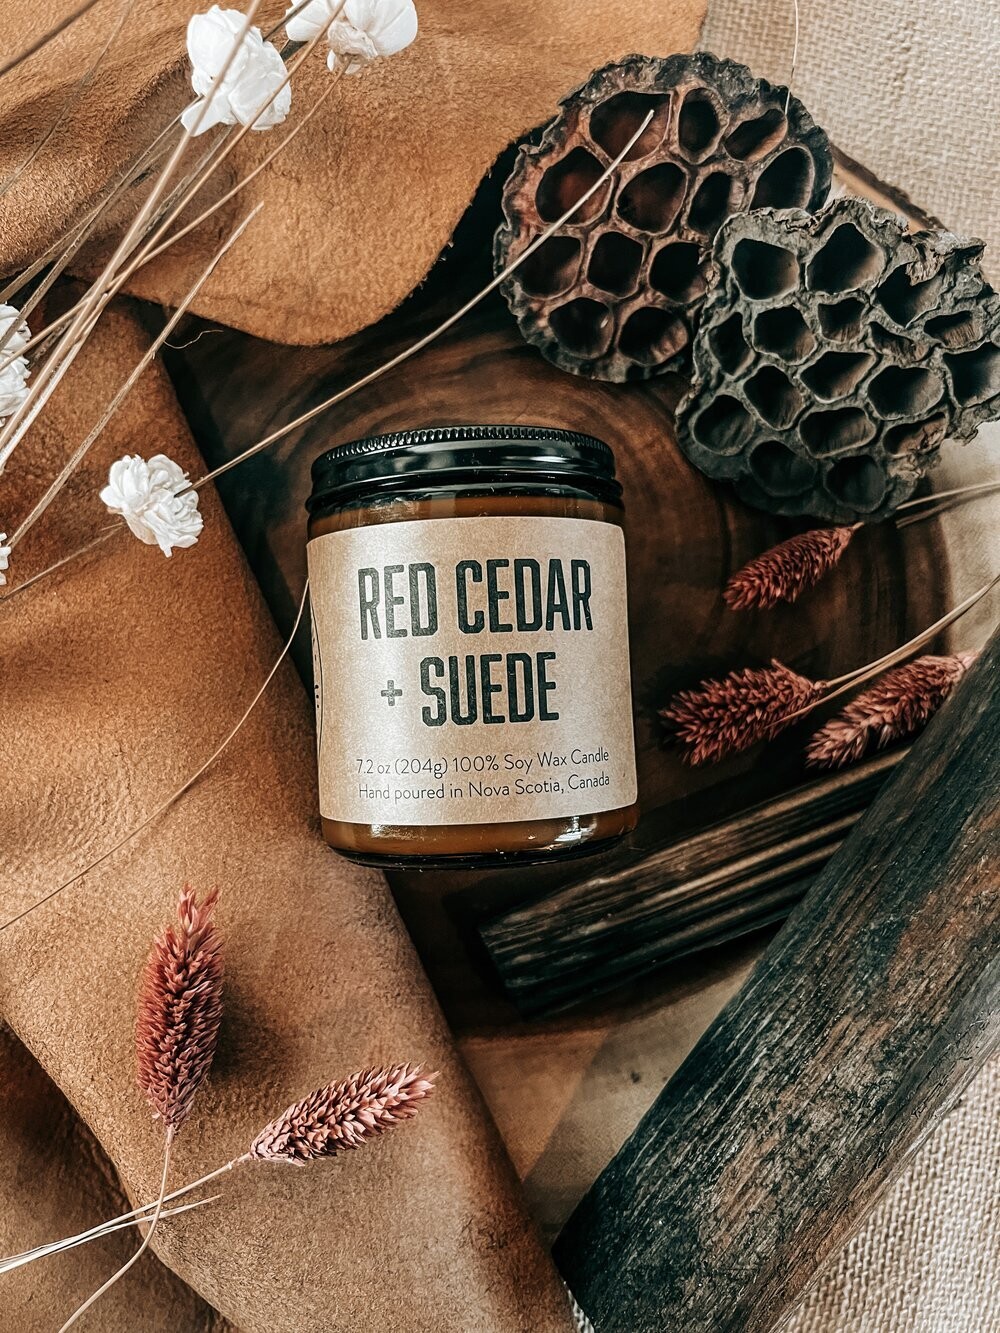 Red Cedar and Suede - Lawrencetown Candle Co